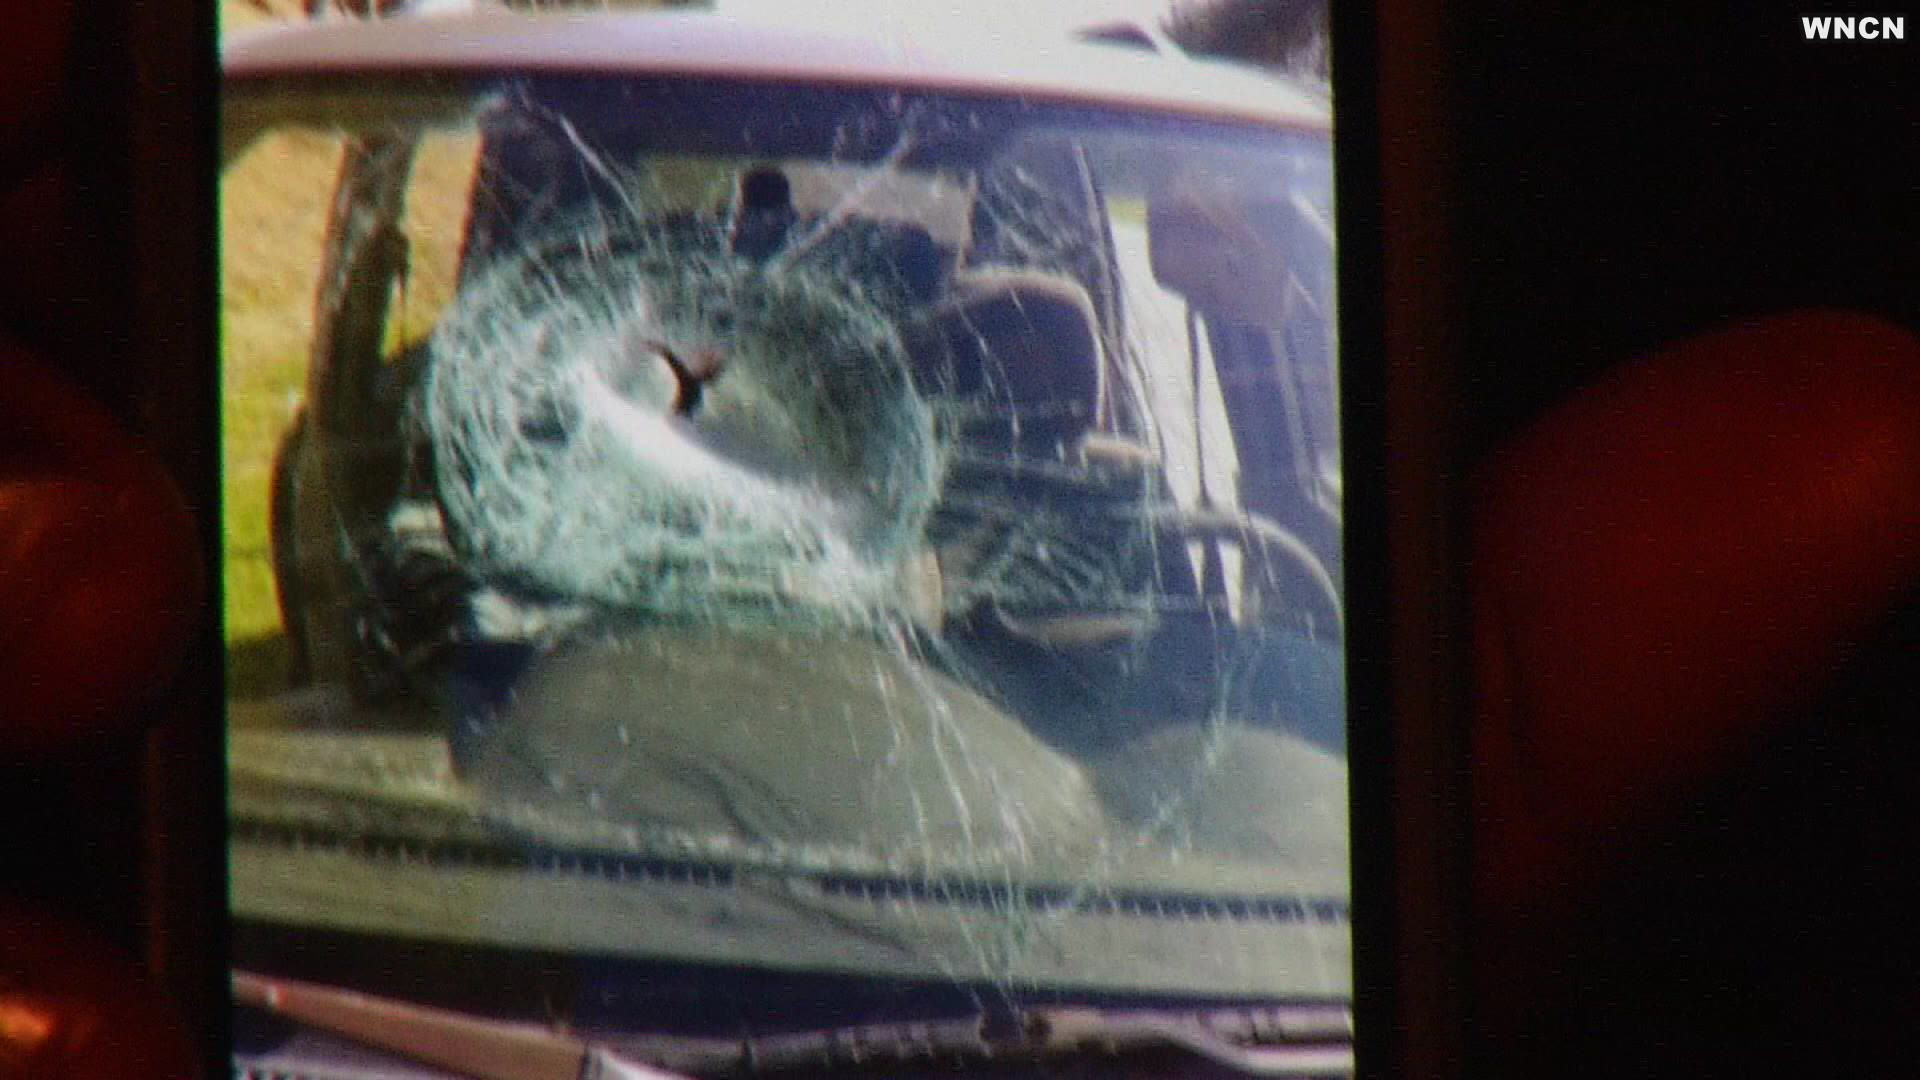 Elizabeth Atkinson was on the way to a job in Selma when something hit the windshield on I-40 in Johnston County.